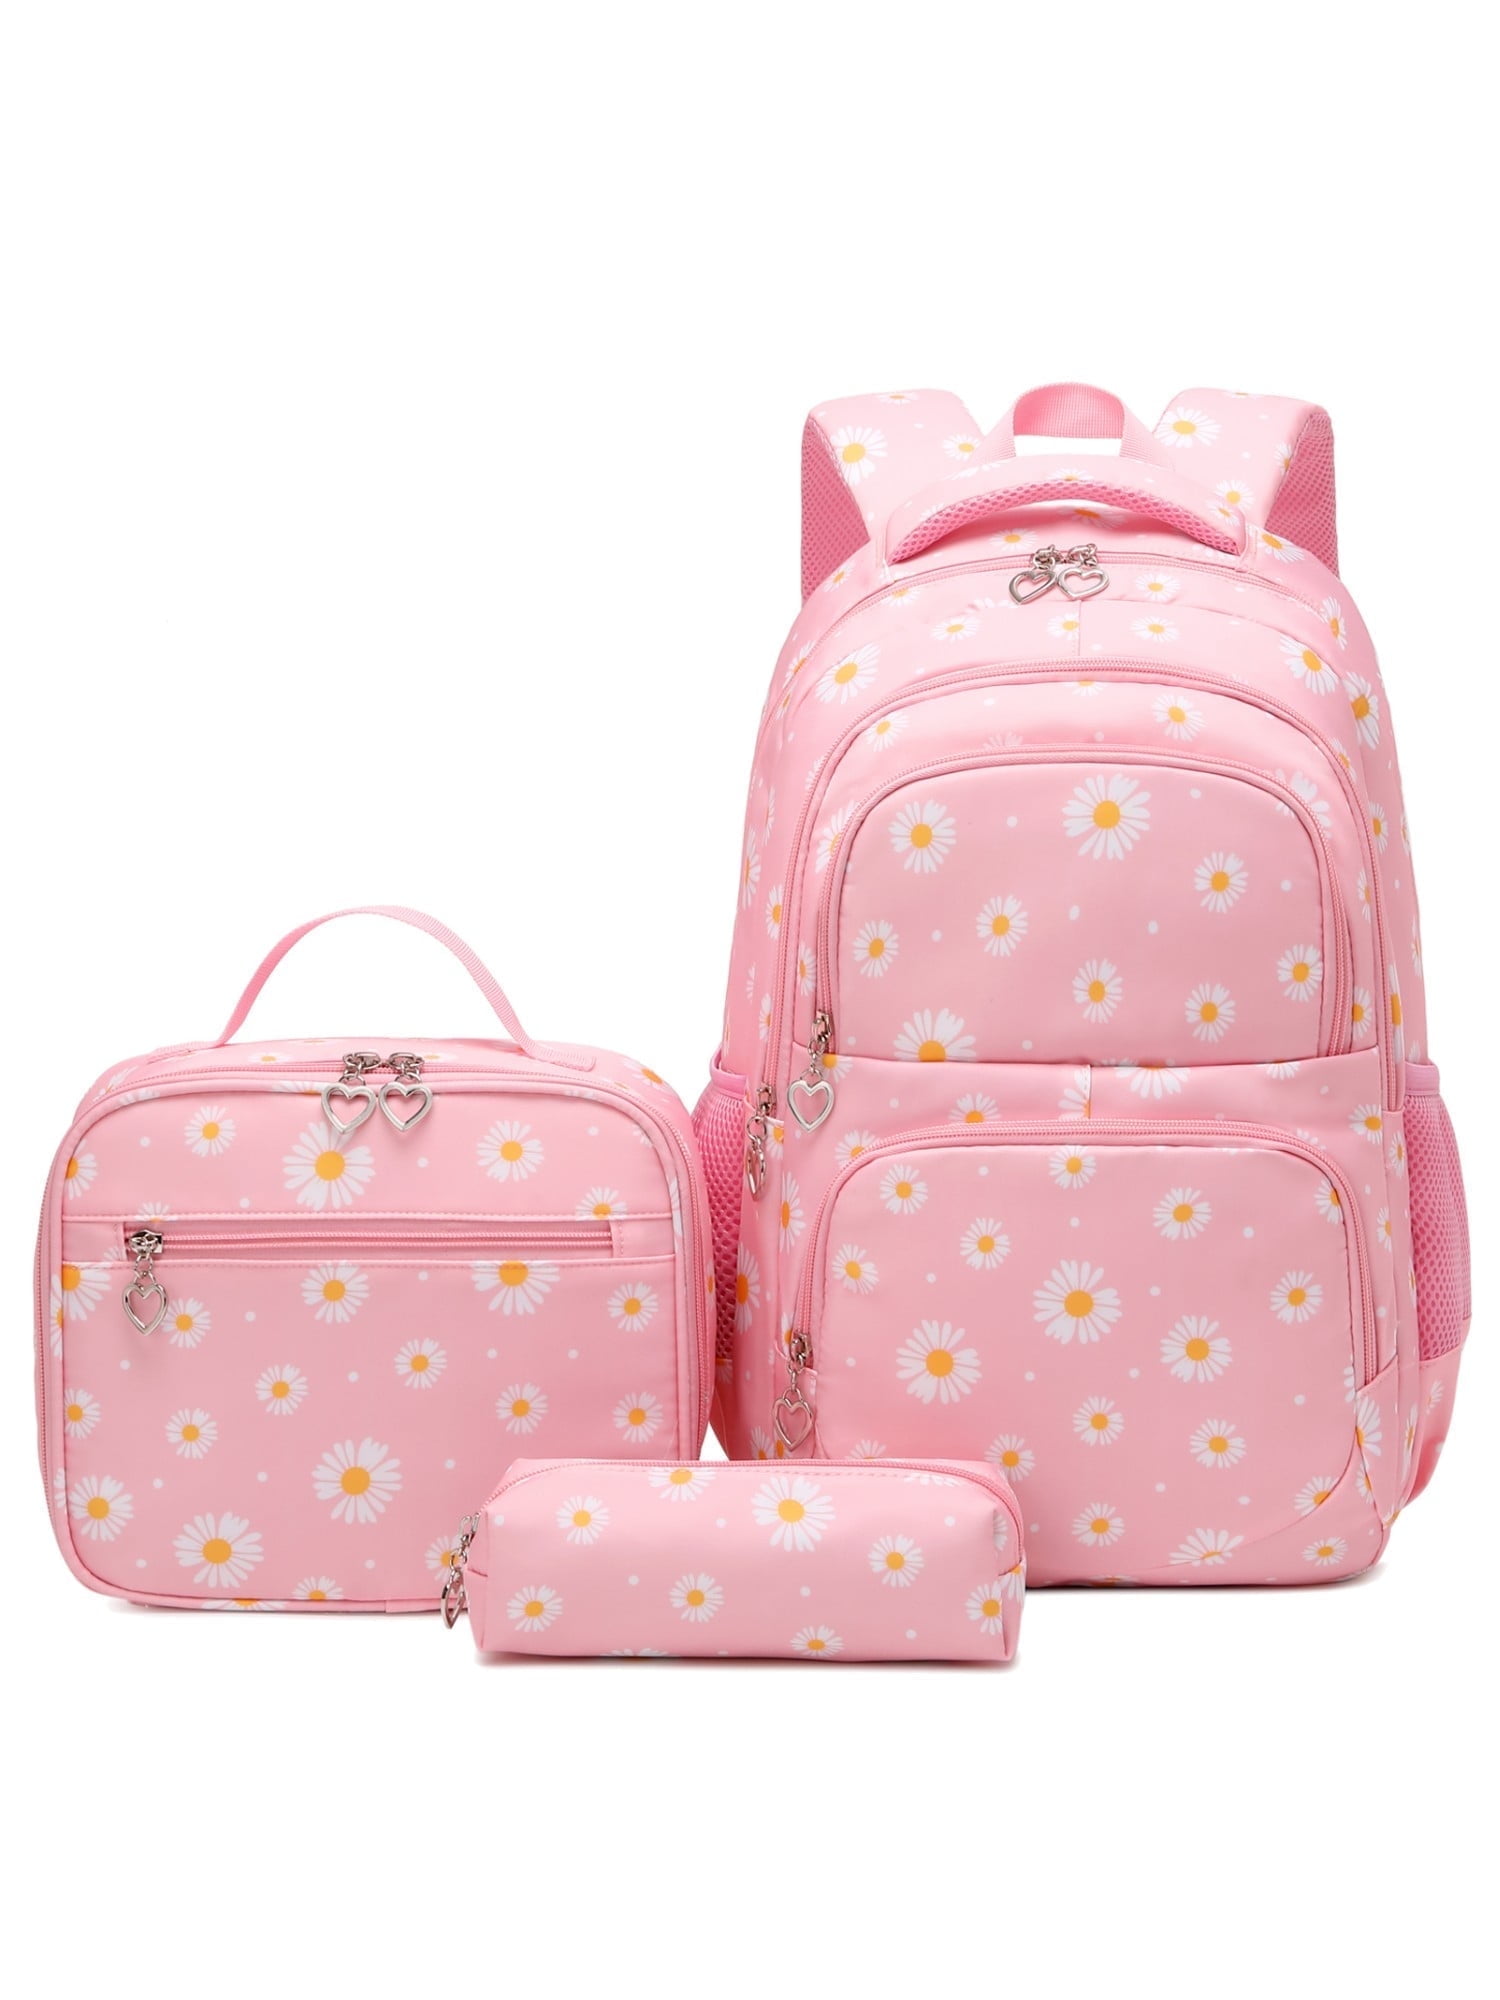 Daisy Printed Backpack with Lunch Box and Pencil Case 3pcs, Forestfish Women Bookbag for Students Between 3-16 Years Old Pink, Women's, Size: One Size